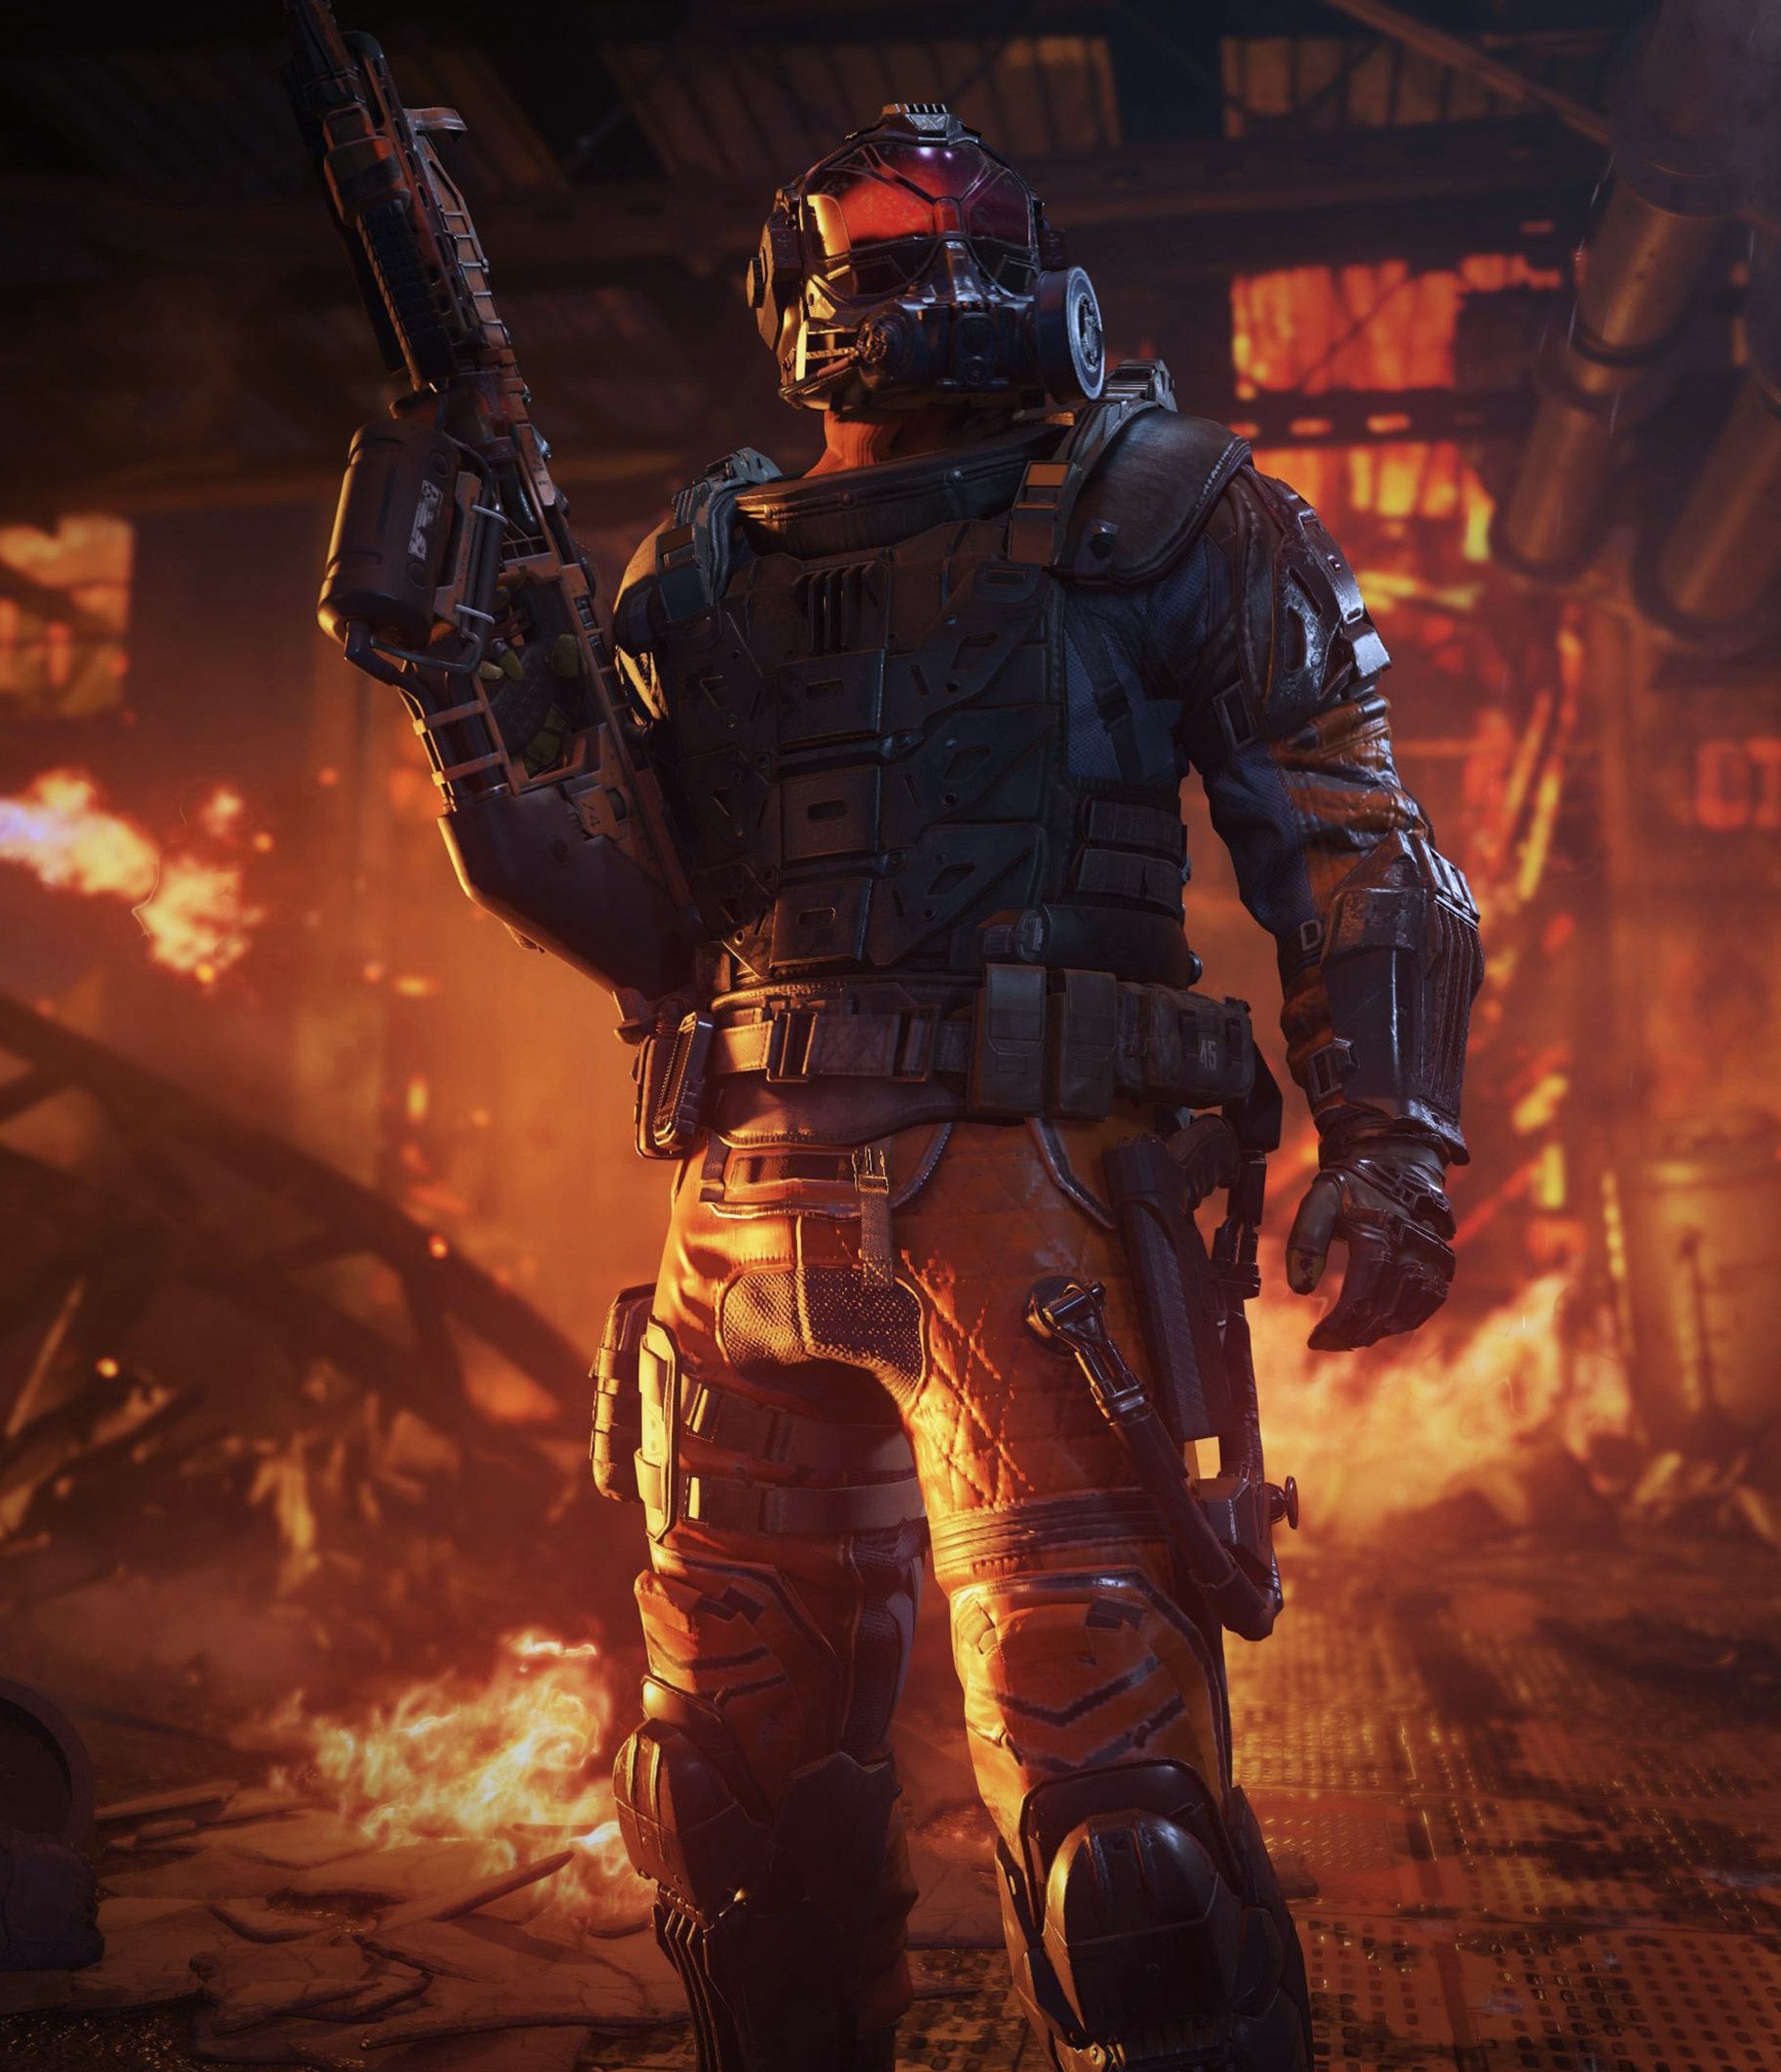 black ops 3 wallpaper 4k,action adventure game,personal protective equipment,fictional character,movie